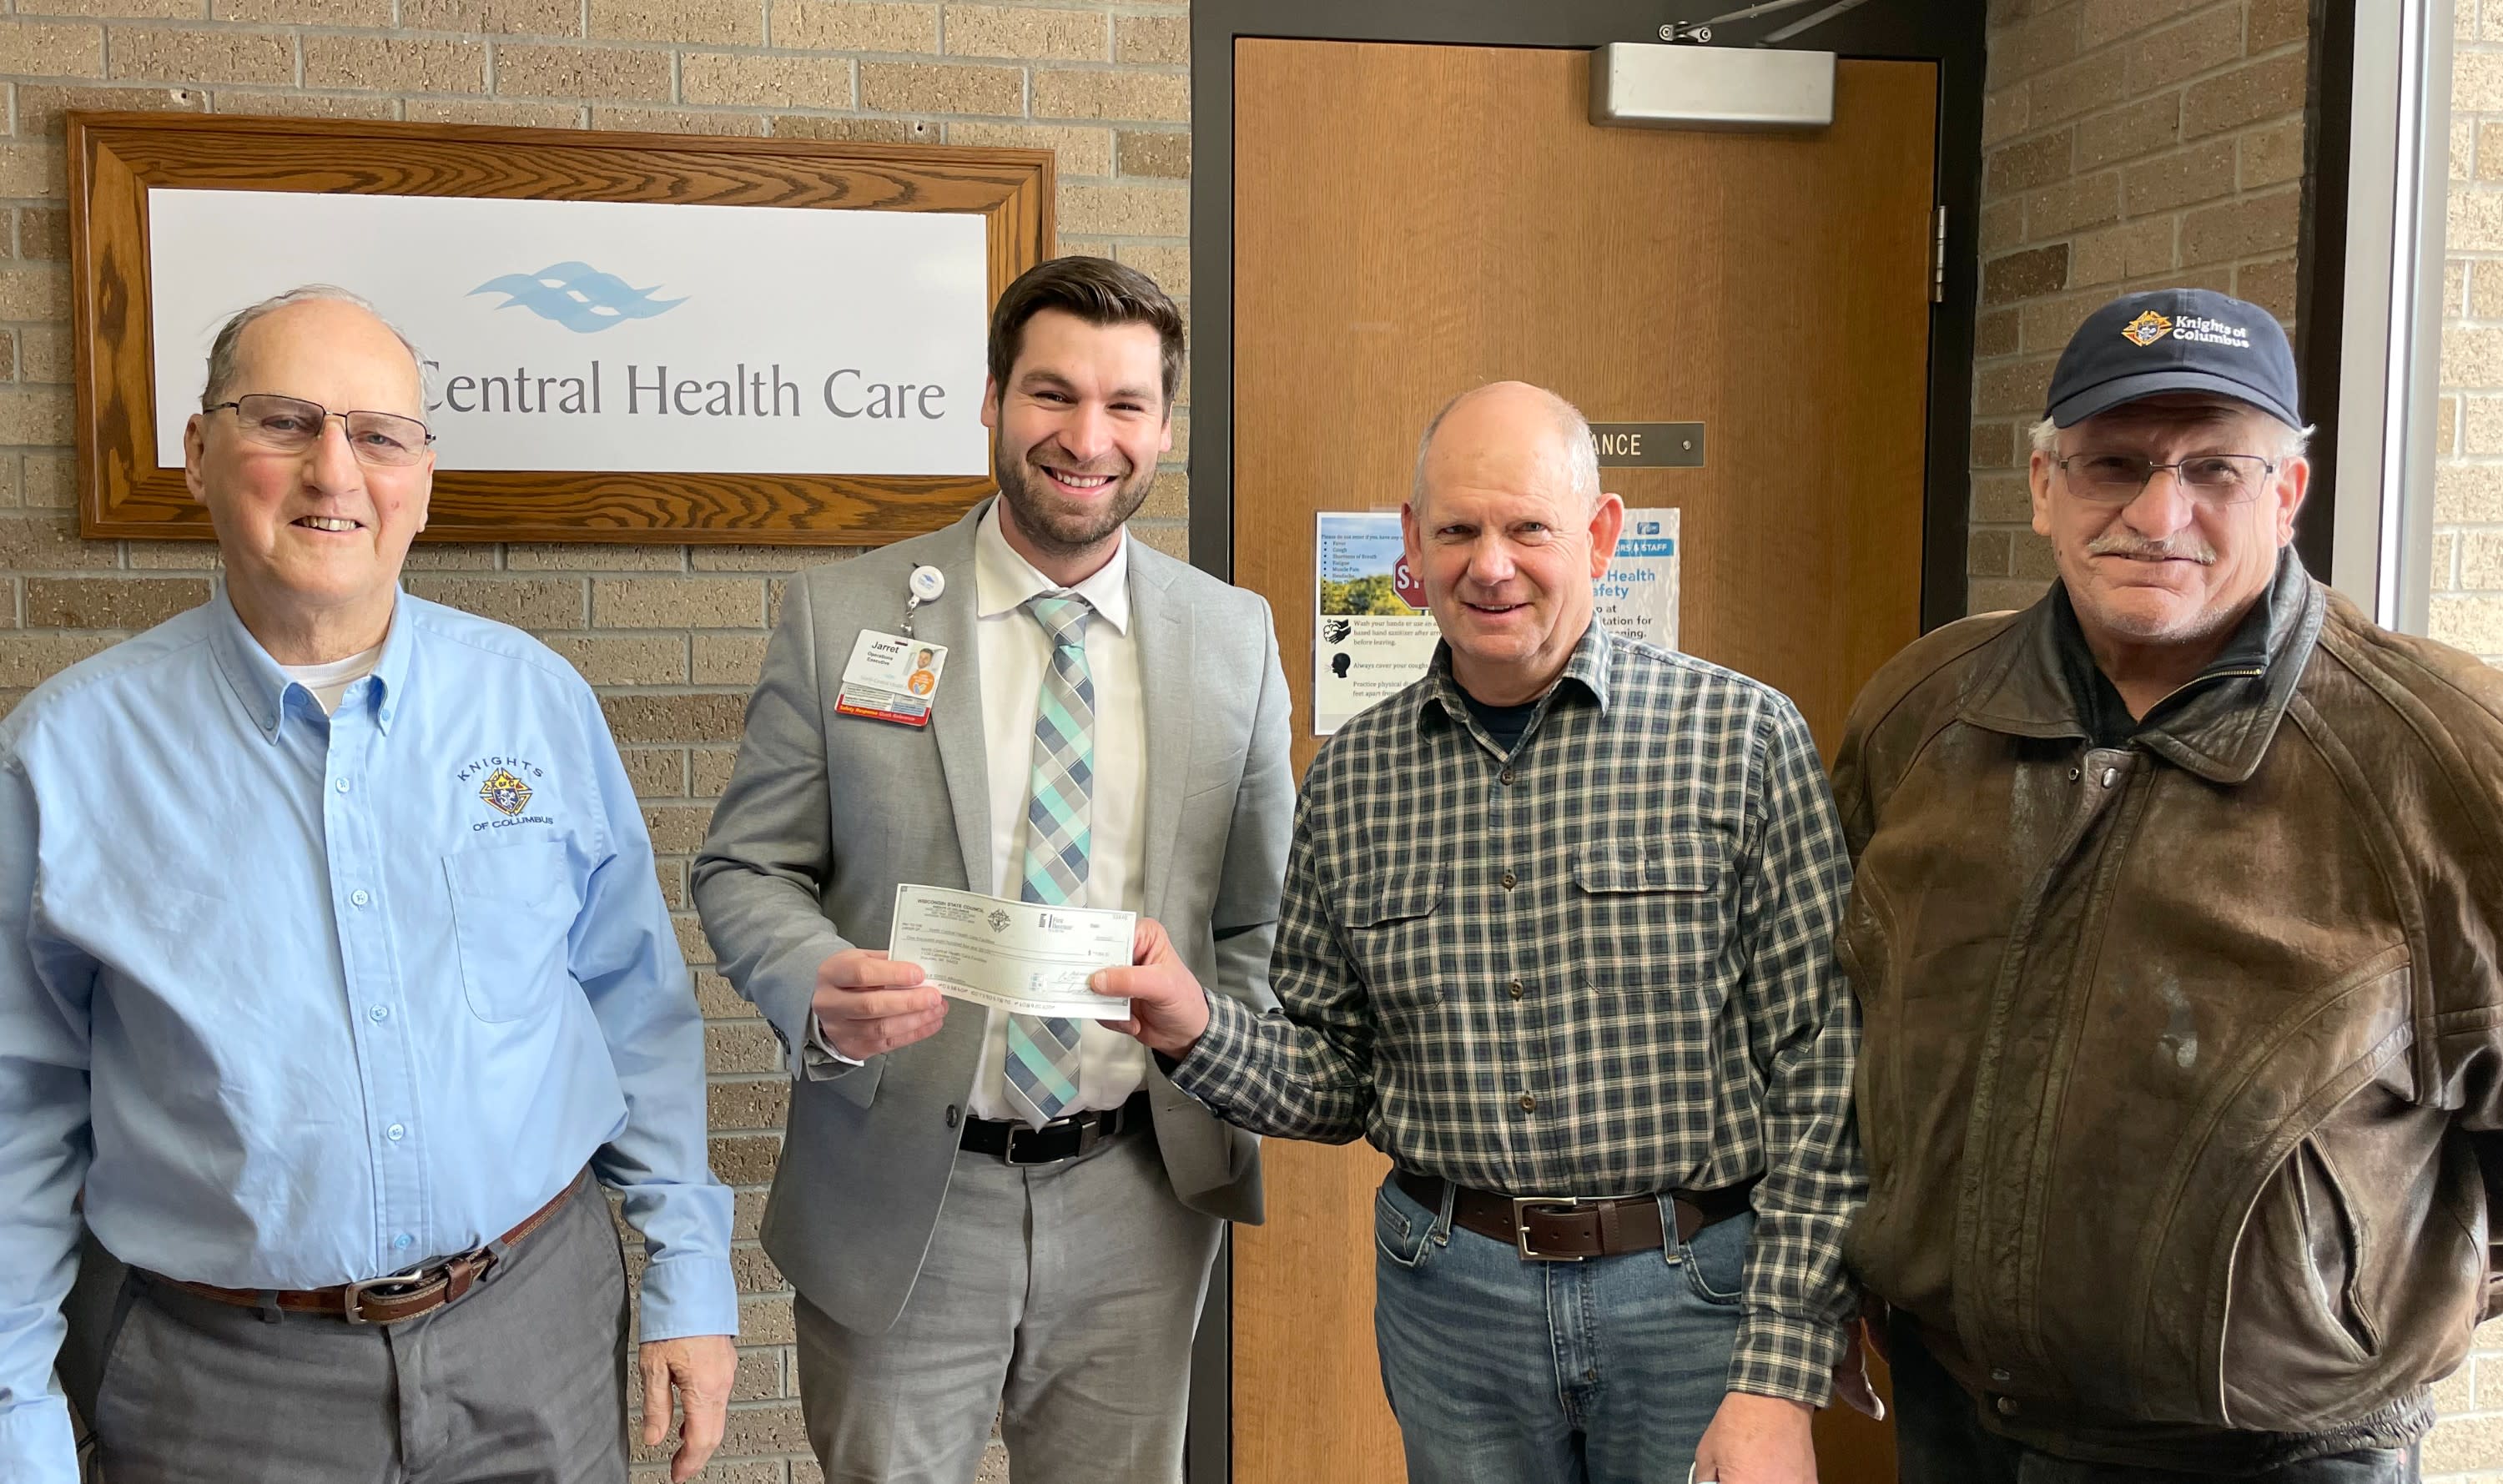 North Central Health Care Receives Generous Donation from Antigo Knights of Columbus